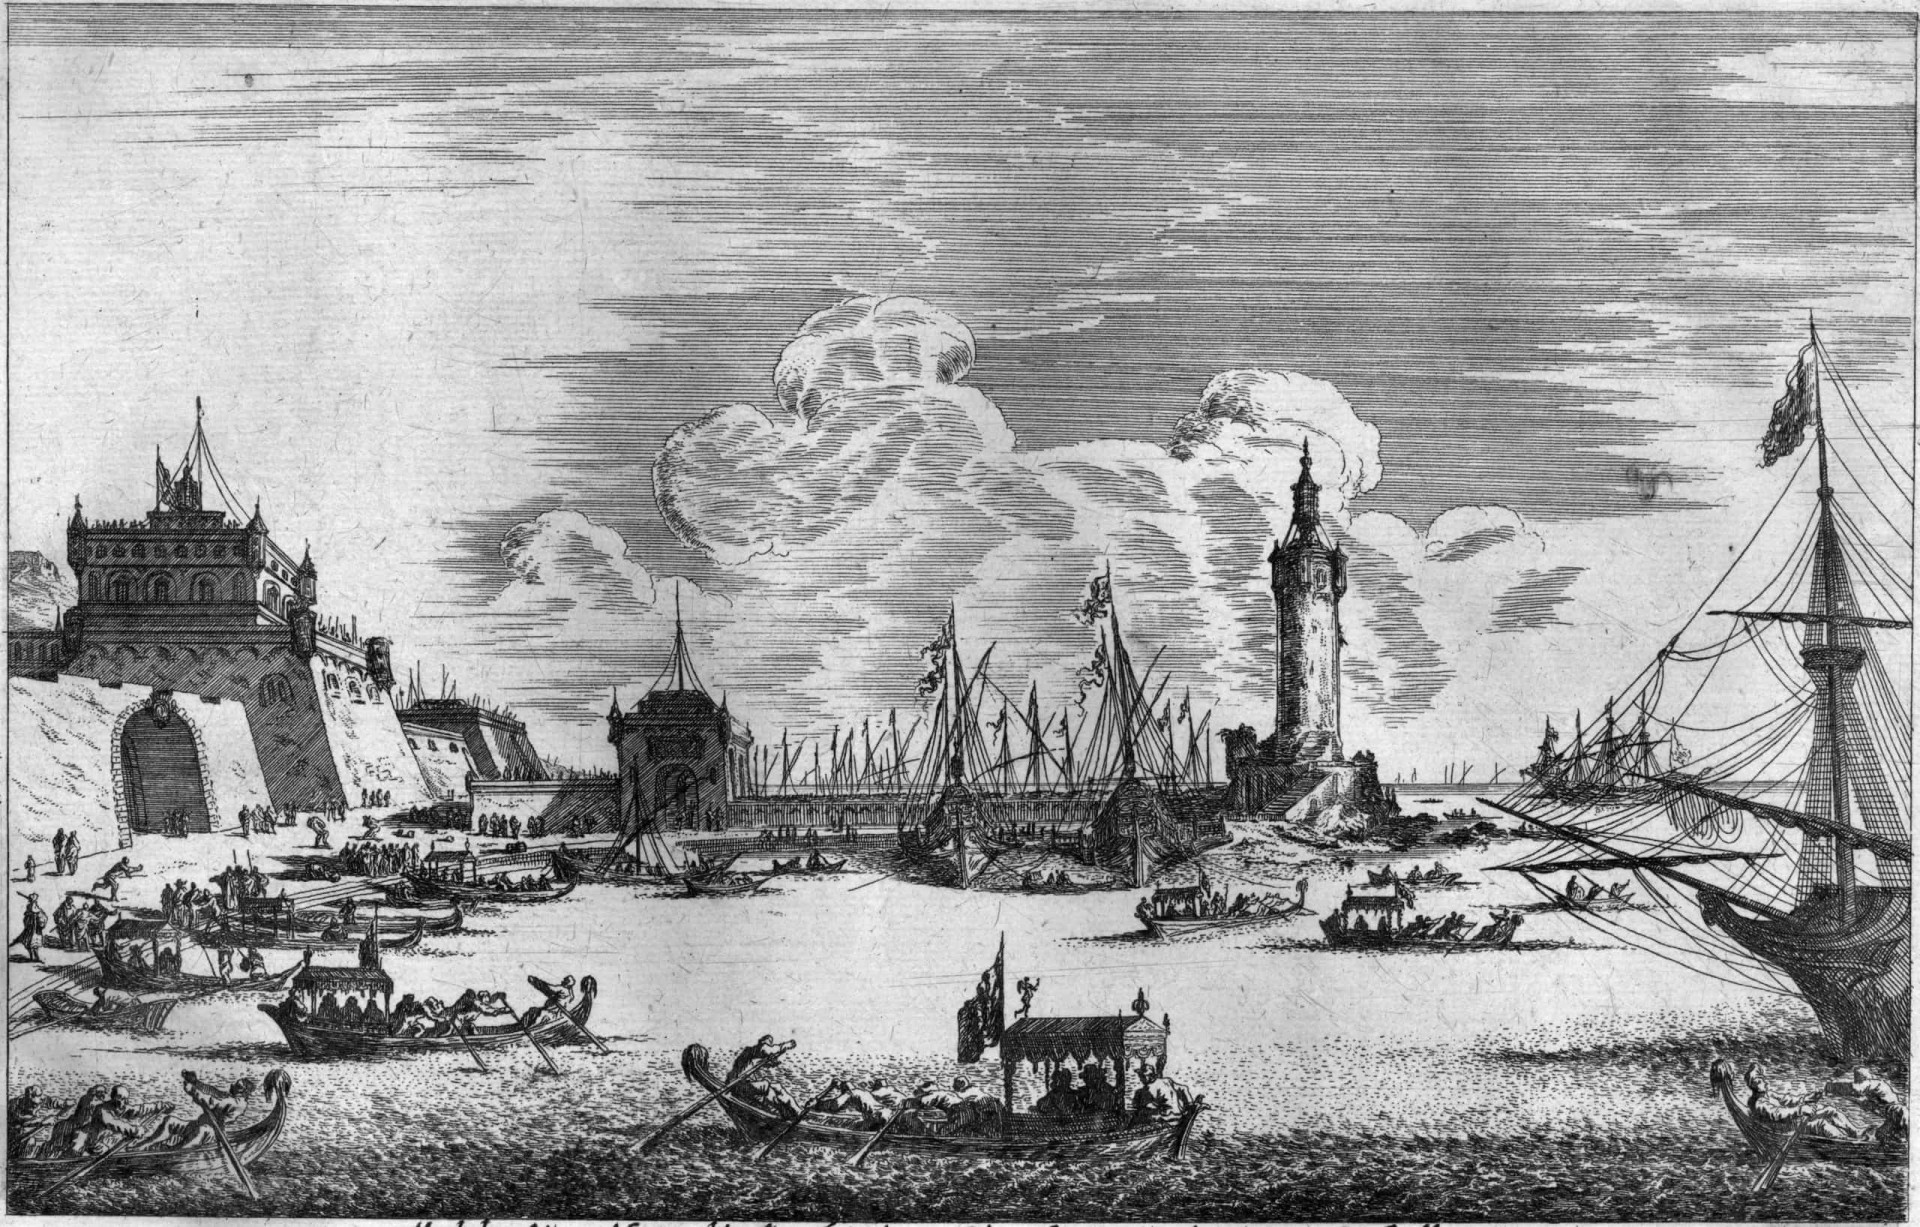 <p>It's suggested that Italy was the likely location of the first leisure excursion in a boat, a voyage we would today call a cruise. Departing Naples (pictured) in June 1833 and carrying European nobility, the vessel toured the Mediterranean before arriving in Constantinople.</p>